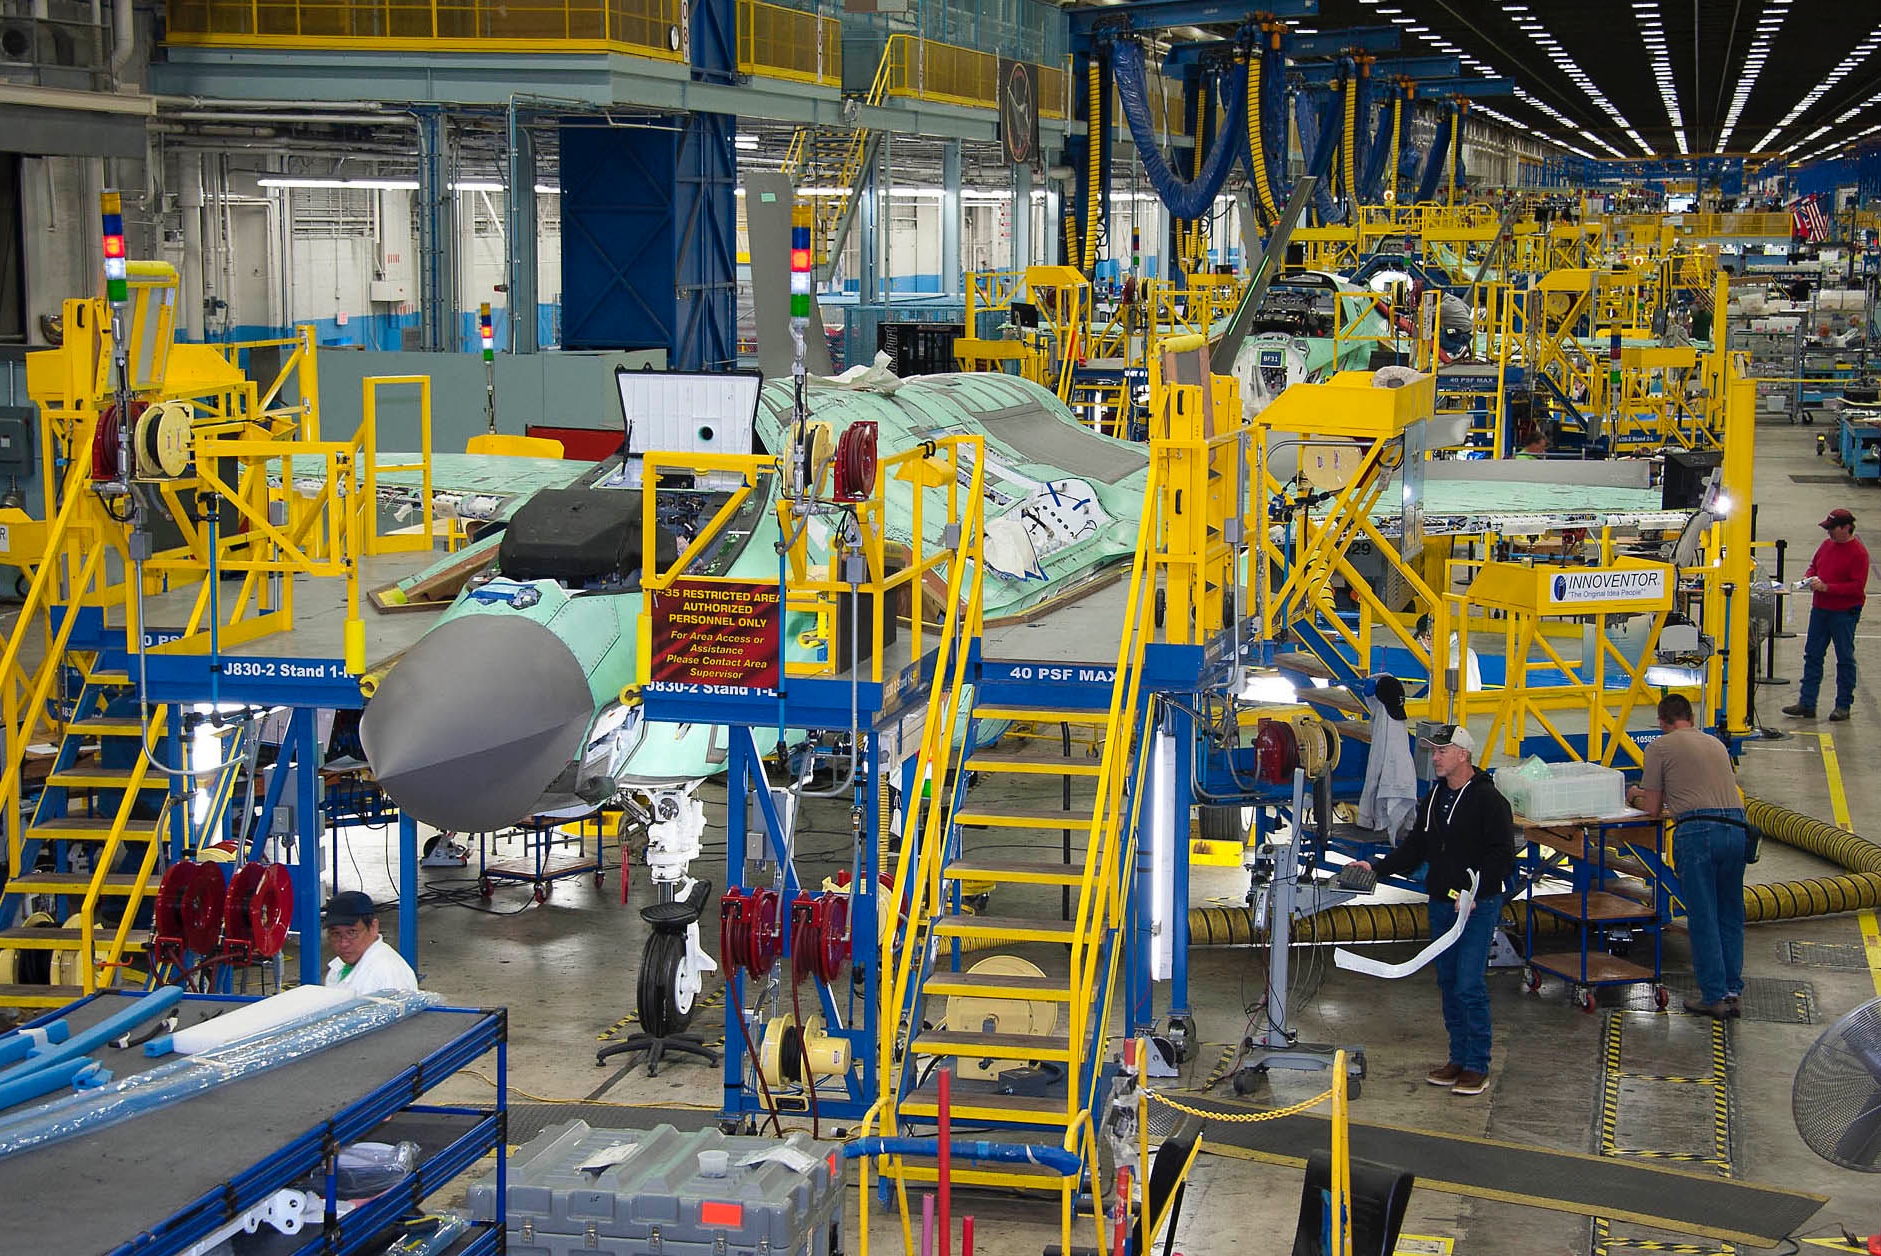 The F35 production line